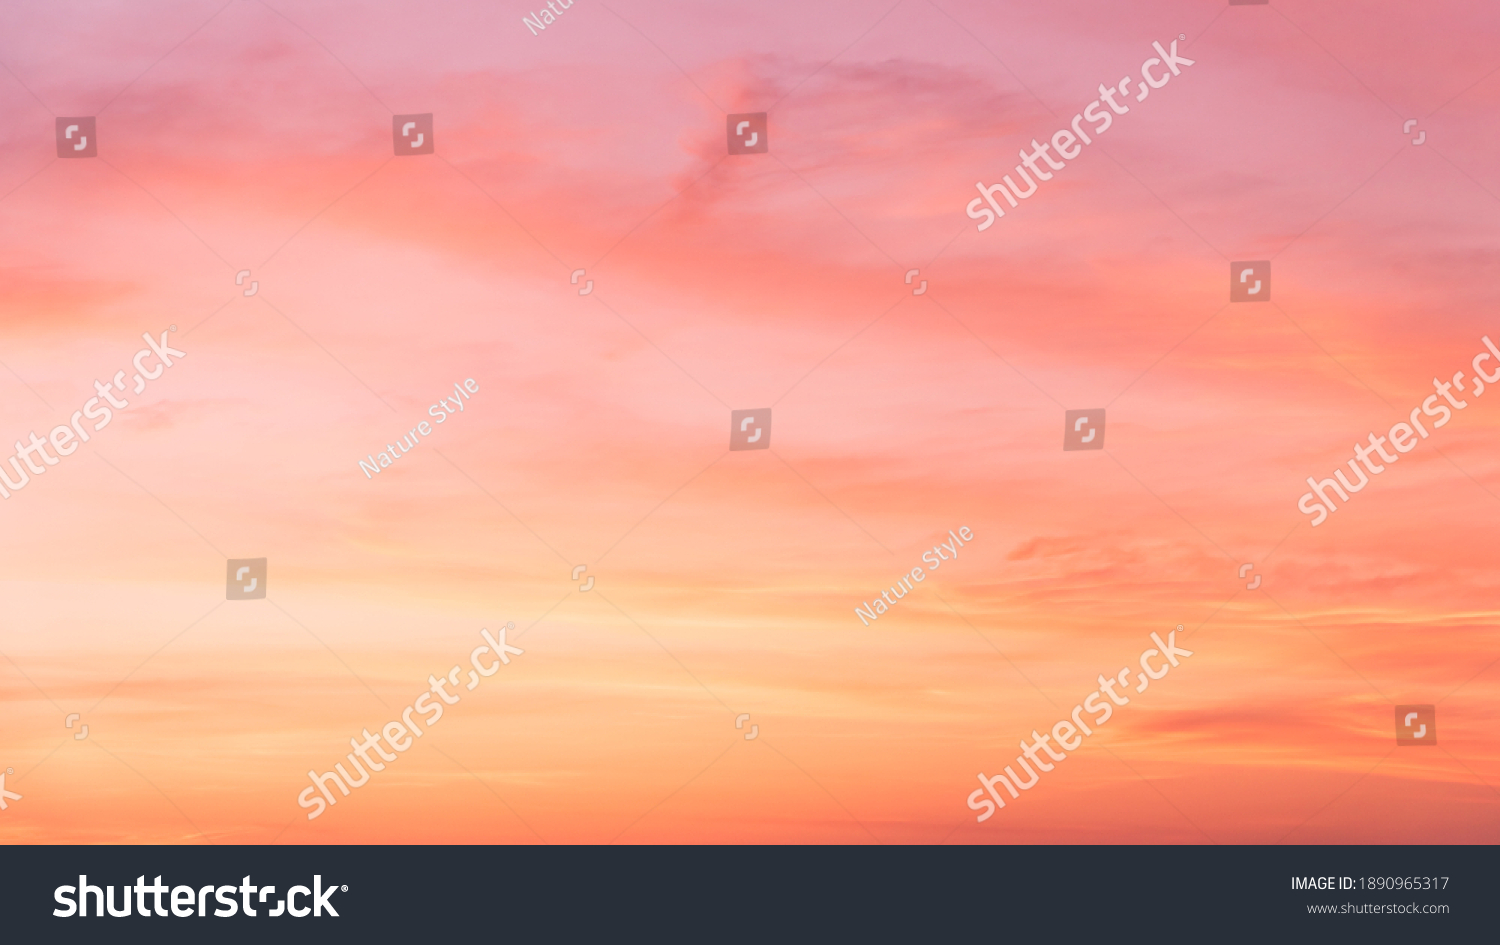 Evening Sky,Pink sky background with Romantic colorful sunlight with orange, yellow and dramatic nature background. #1890965317